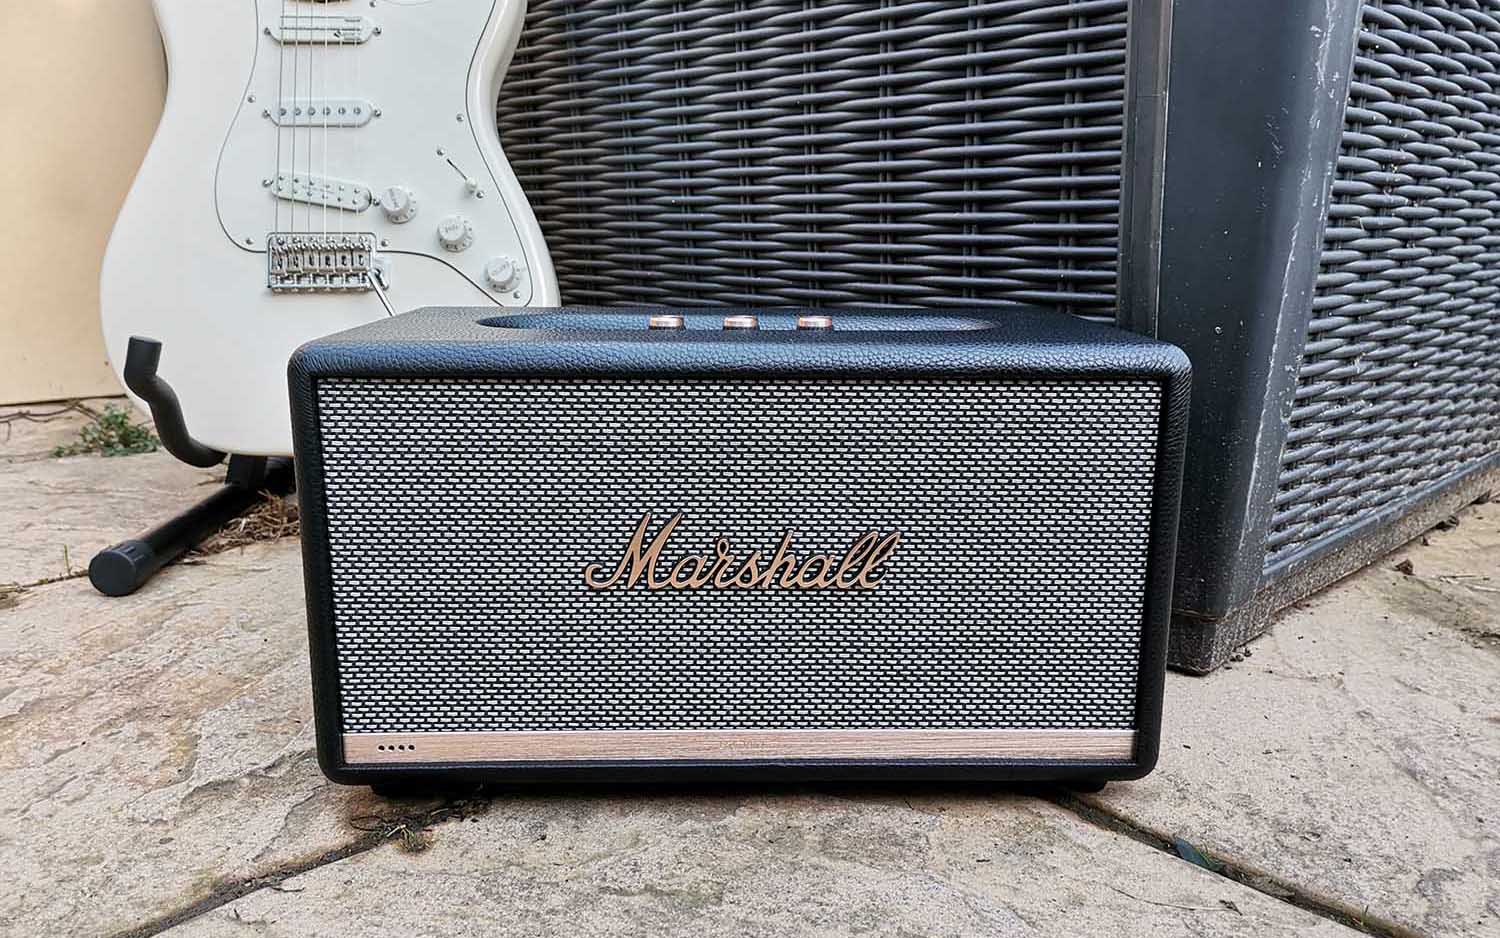 Marshall Stanmore 2 Review 